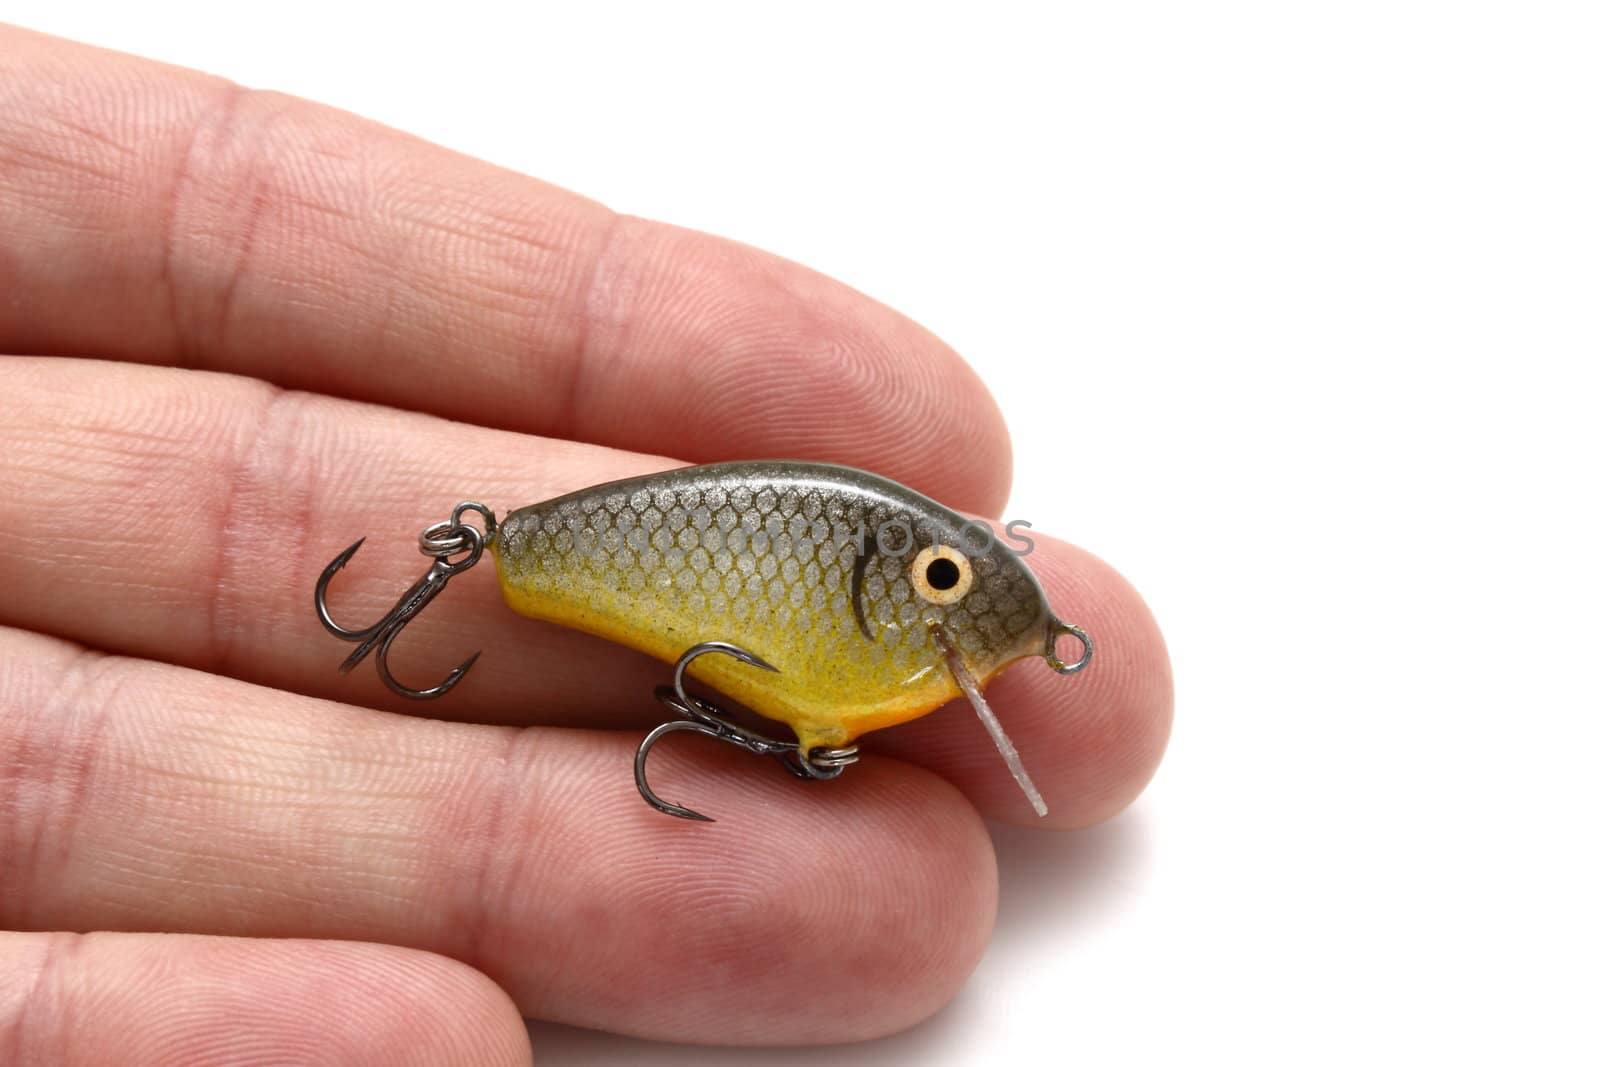 trout fishing lure in hand over white background